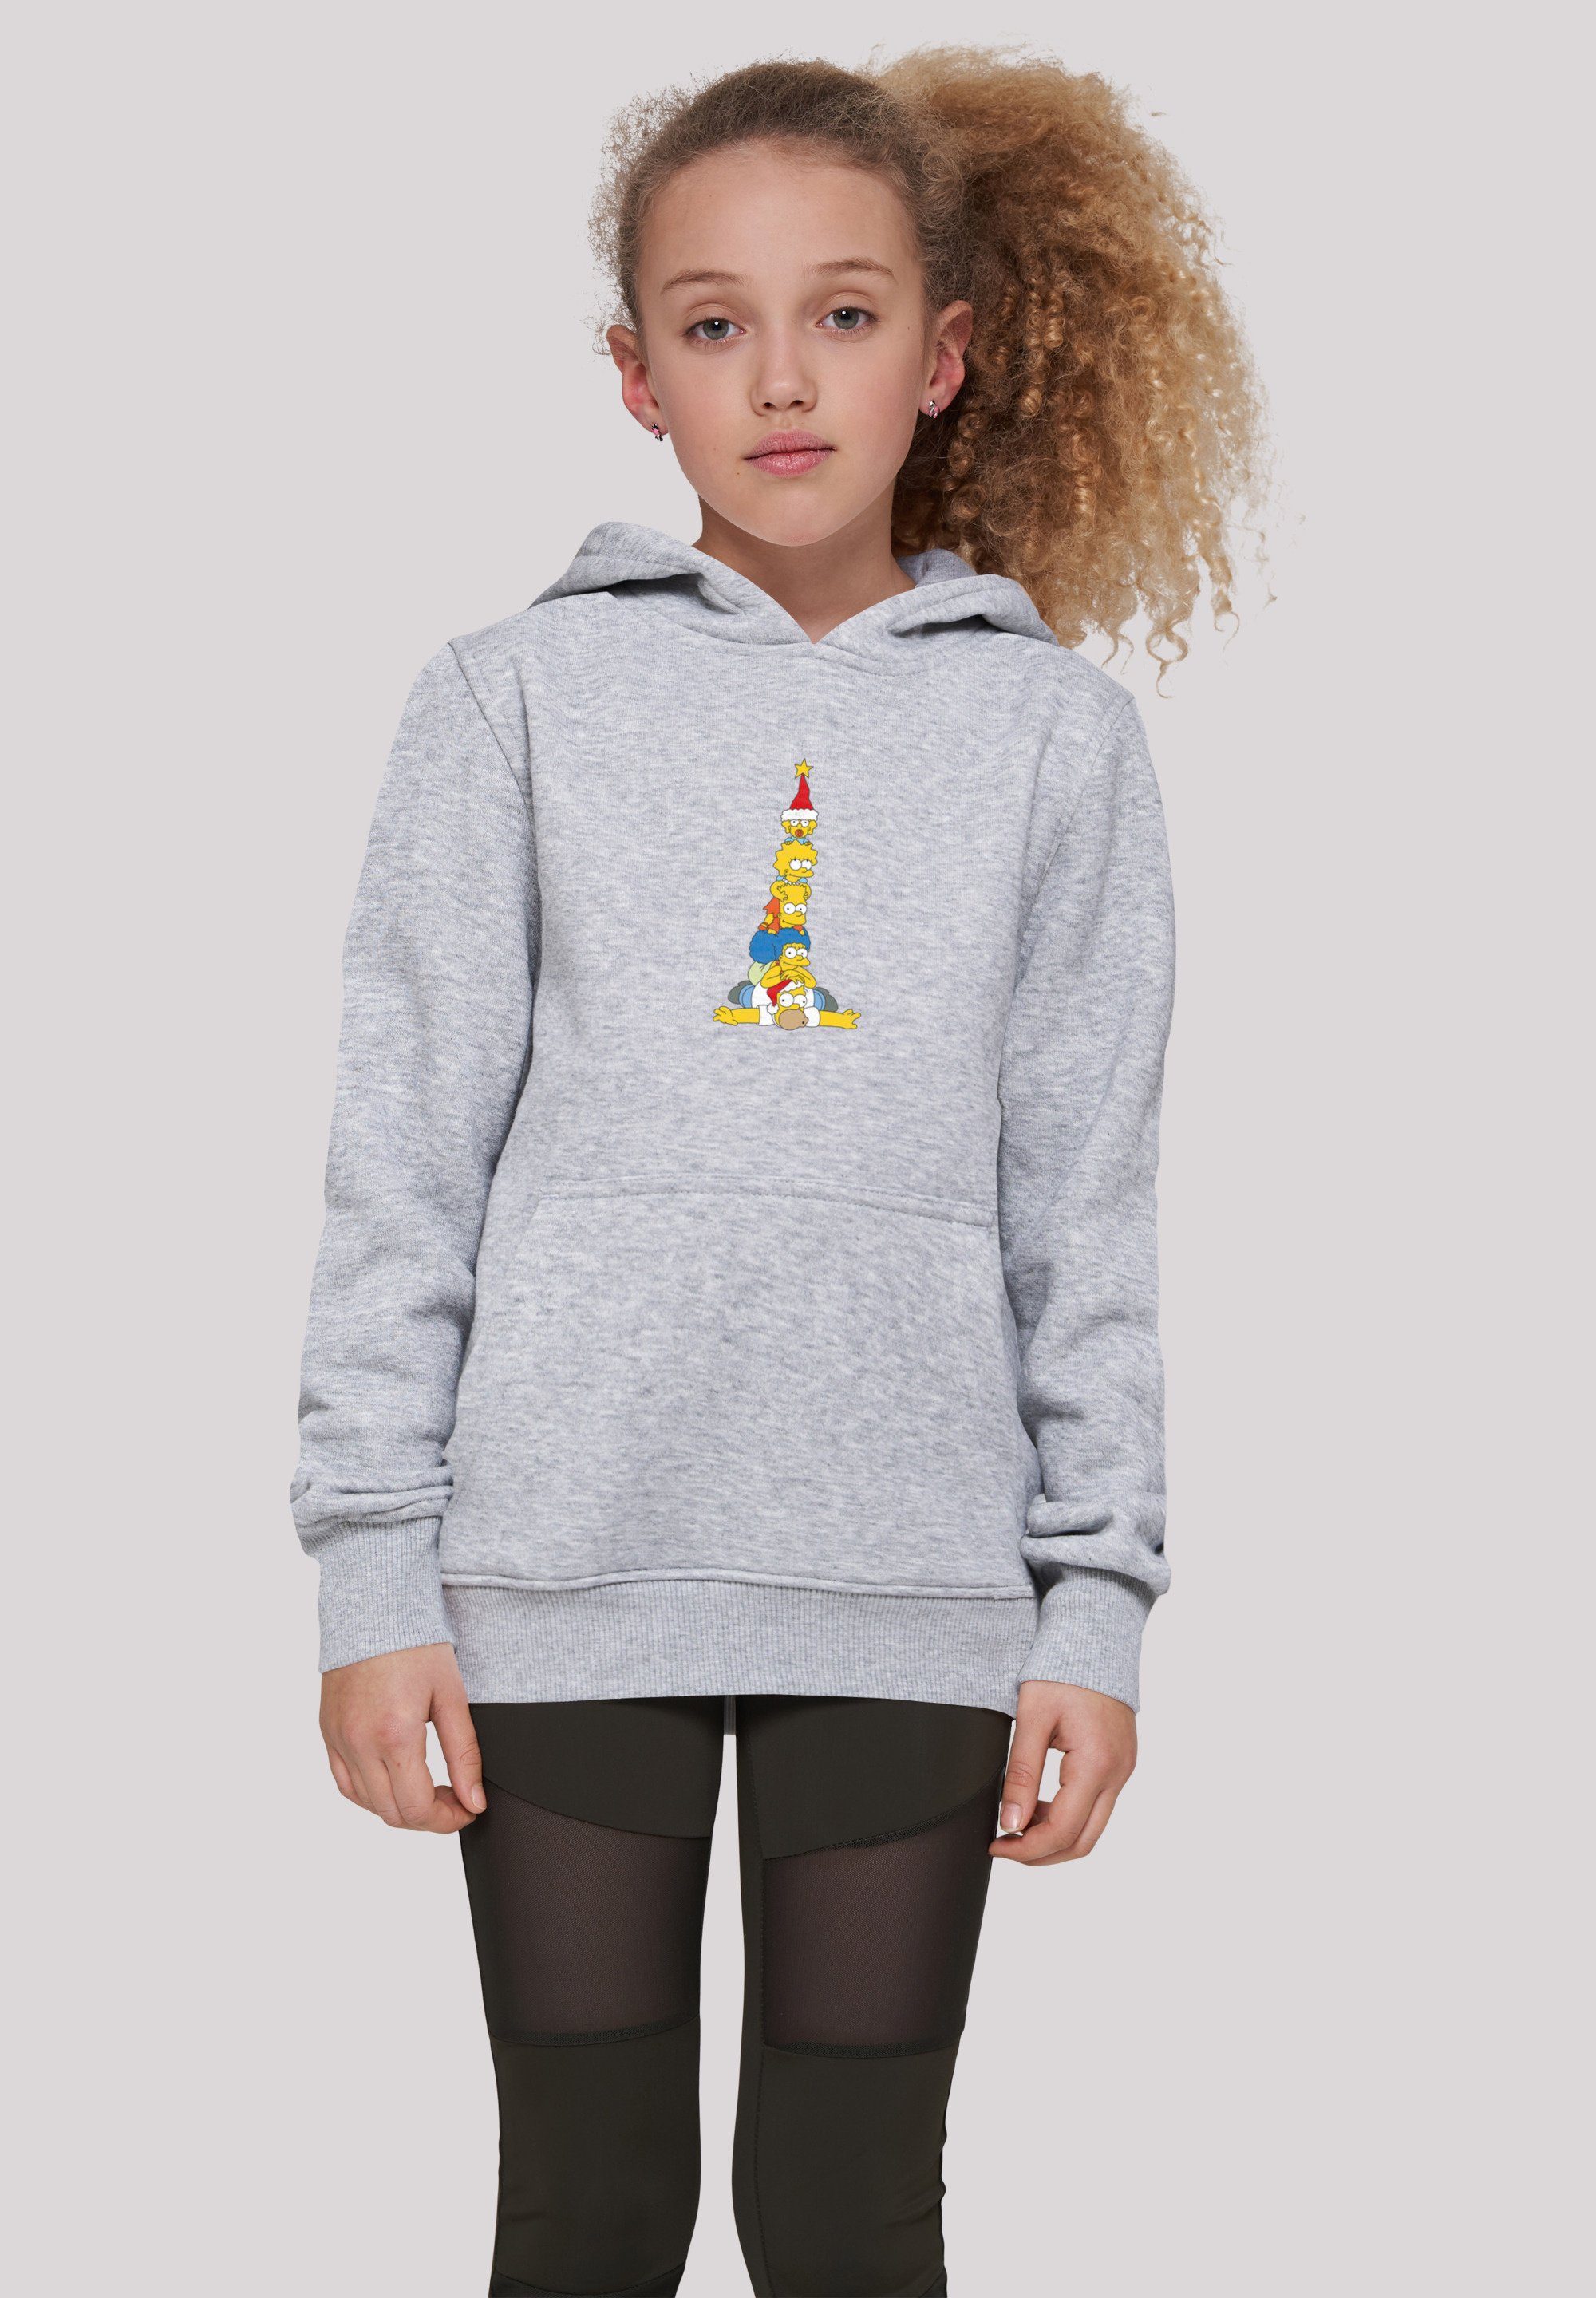 F4NT4STIC Kapuzenpullover The Simpsons Family Christmas Weihnachtsbaum Print heather grey | Hoodies